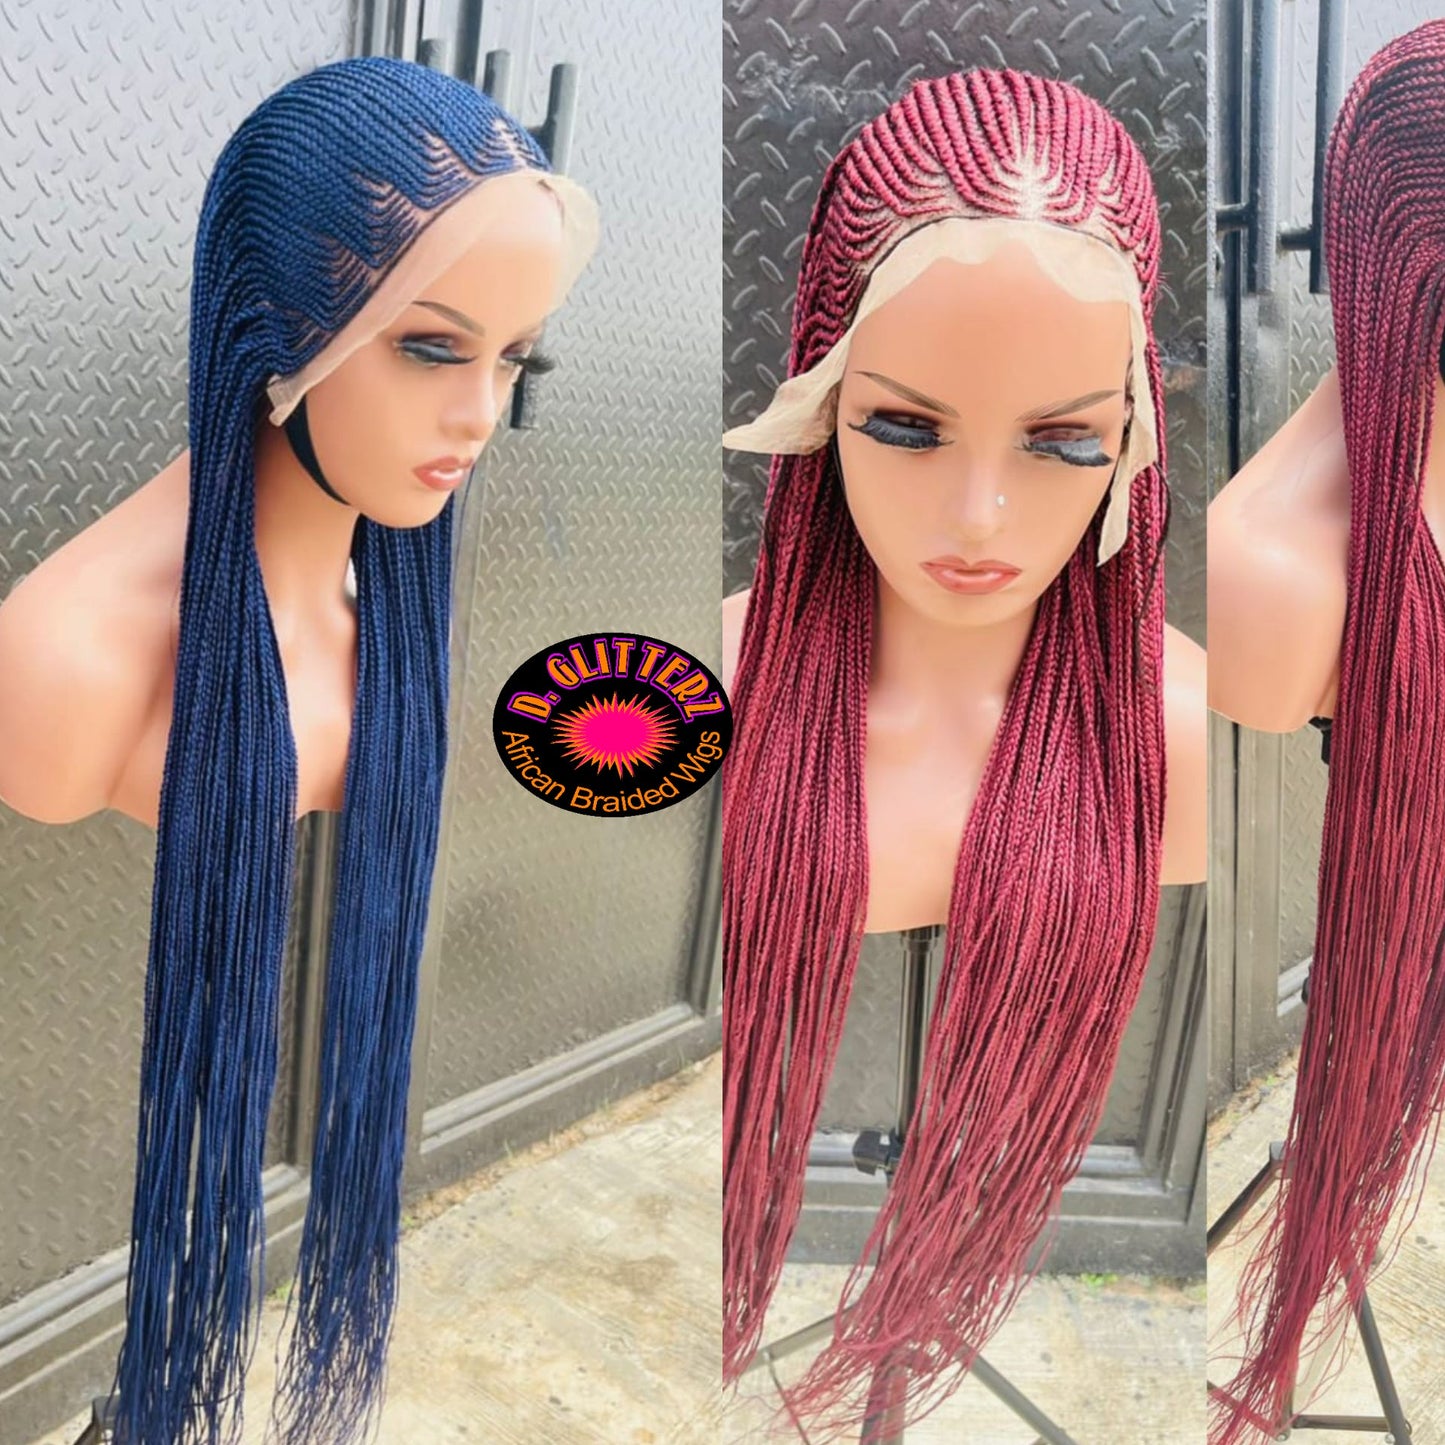 AFRICAN BRAIDED WIGS (SEVEN SEVEN BRAIDED STYLE) ON 13*6 FRONTAL CLOSURE - d.glitterzwigs